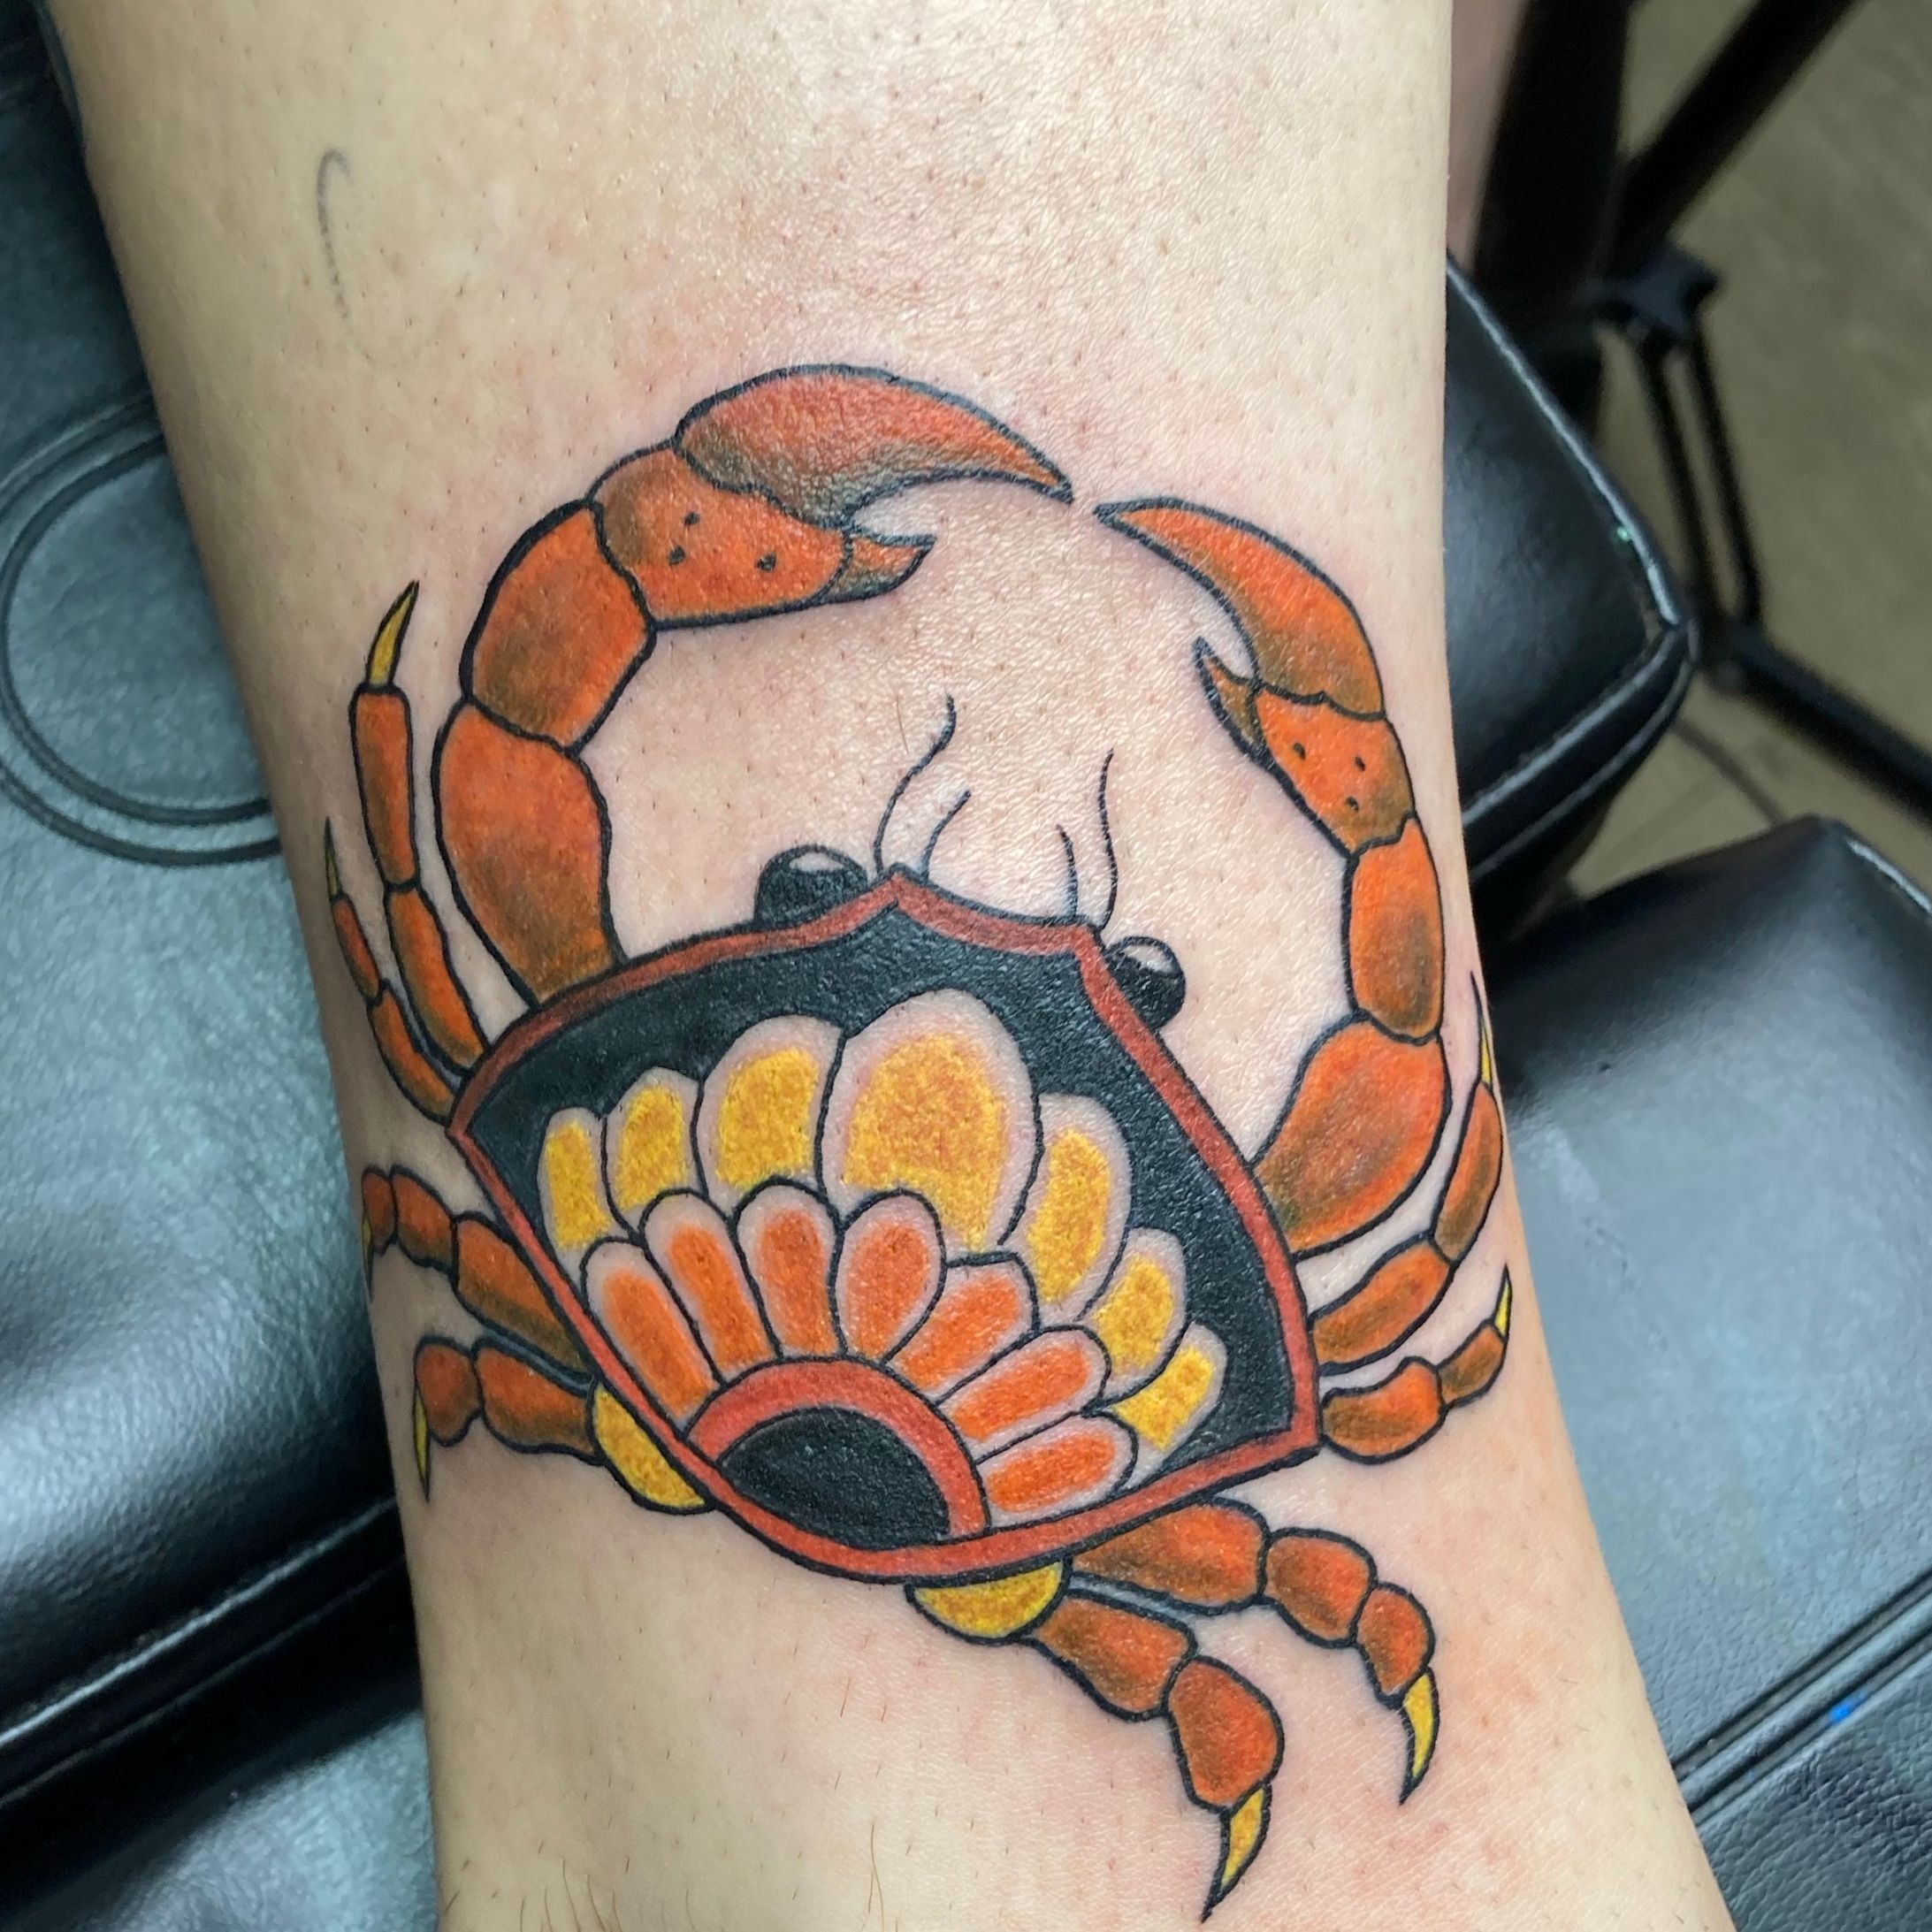 Japanese Dragon Sleeve Tattoo with Crab Design